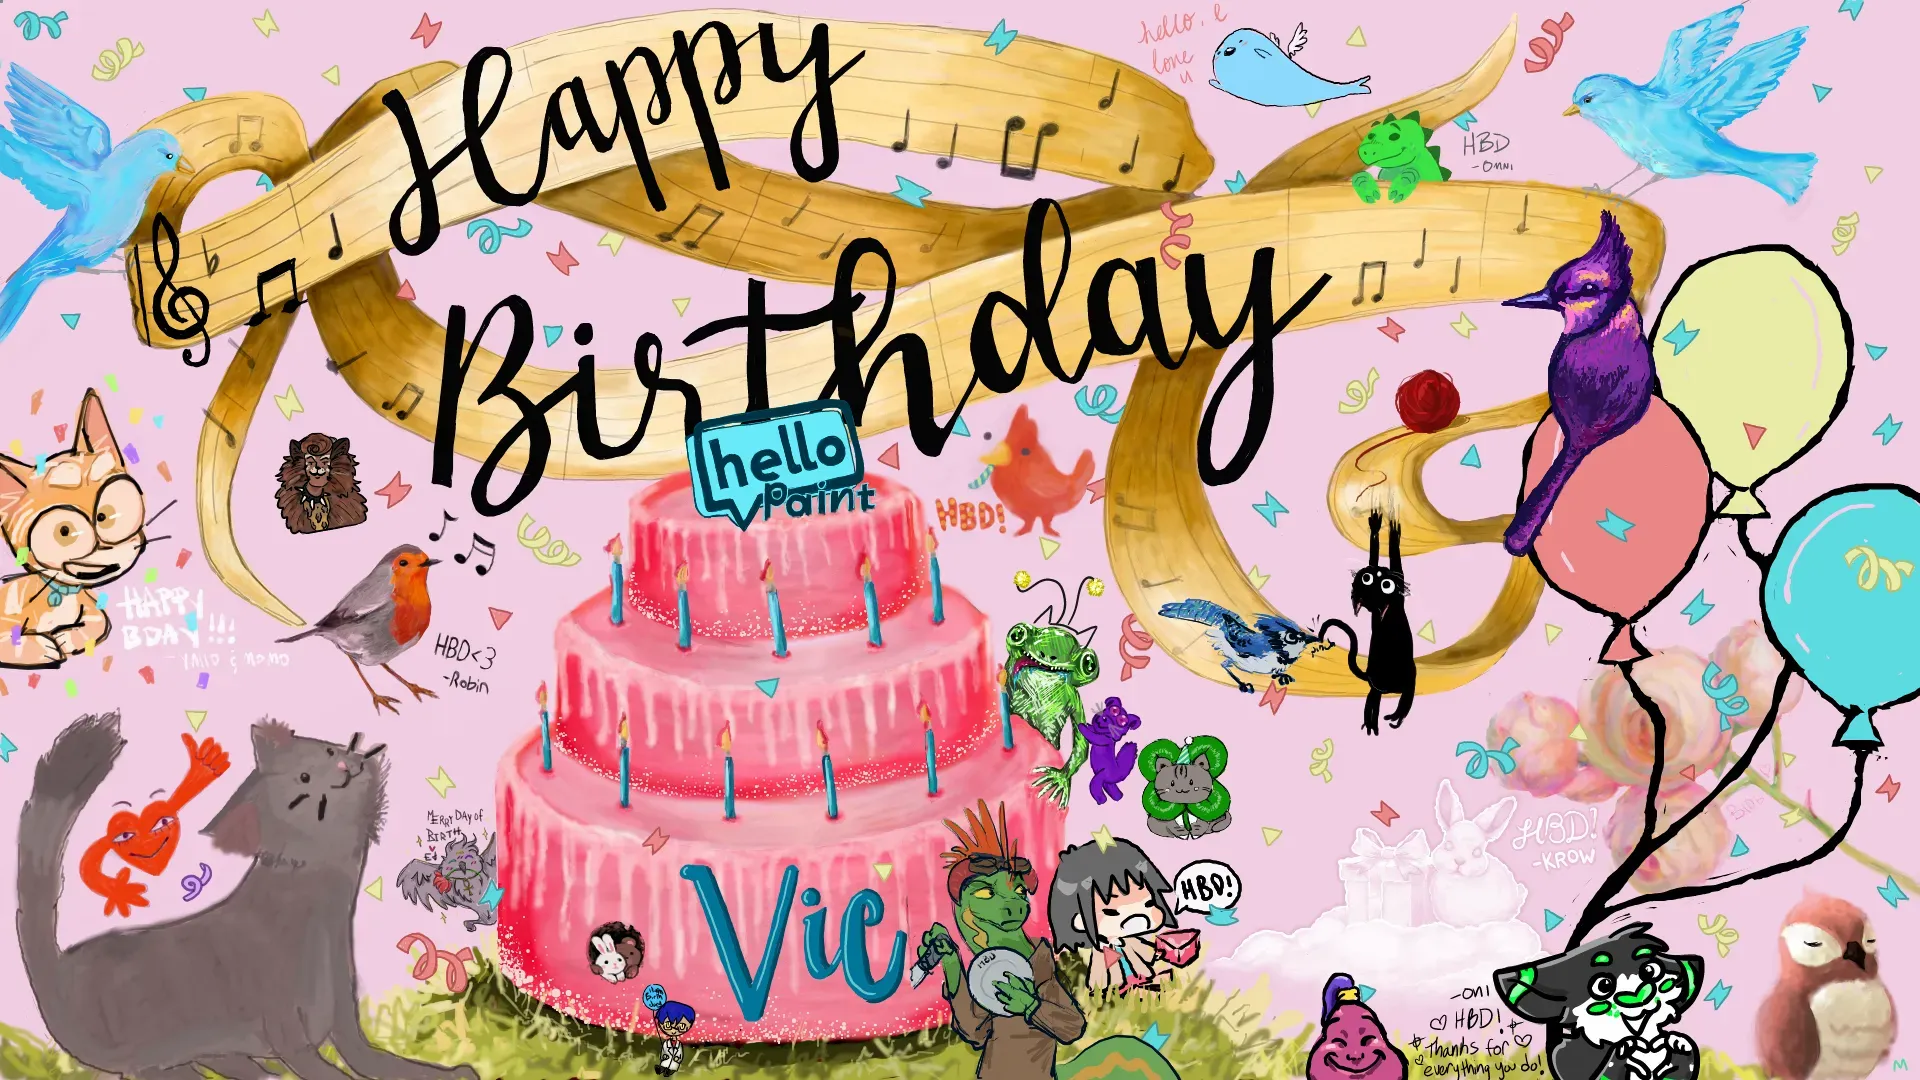 We all hope you have a wonderful birthday Vic! Thank you so much for being your awesome self and helping to bring HelloPaint to life!!